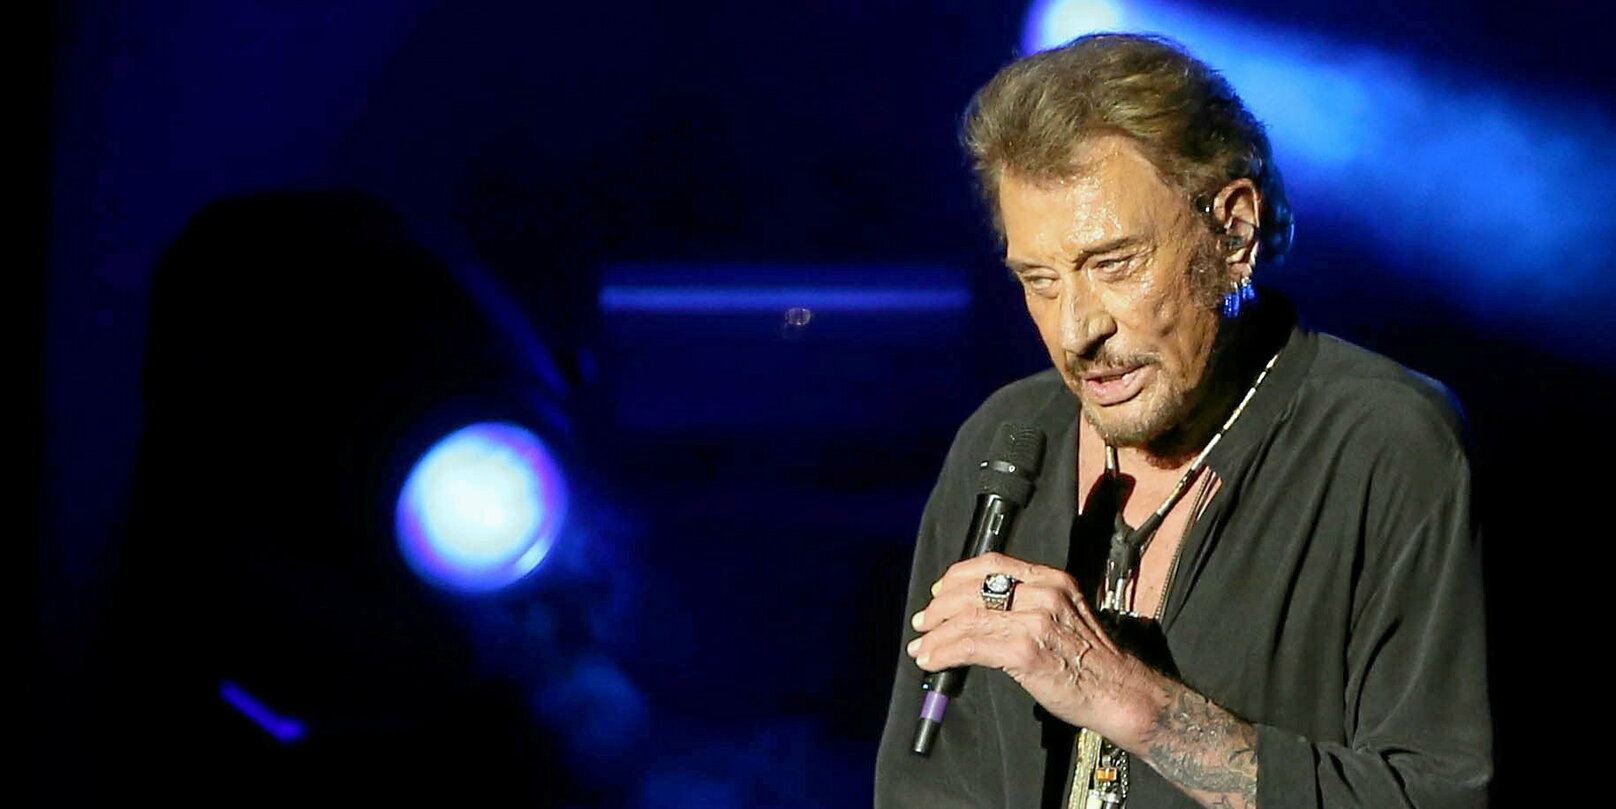 Lee Halliday, “father of heart” of Johnny Hallyday, died